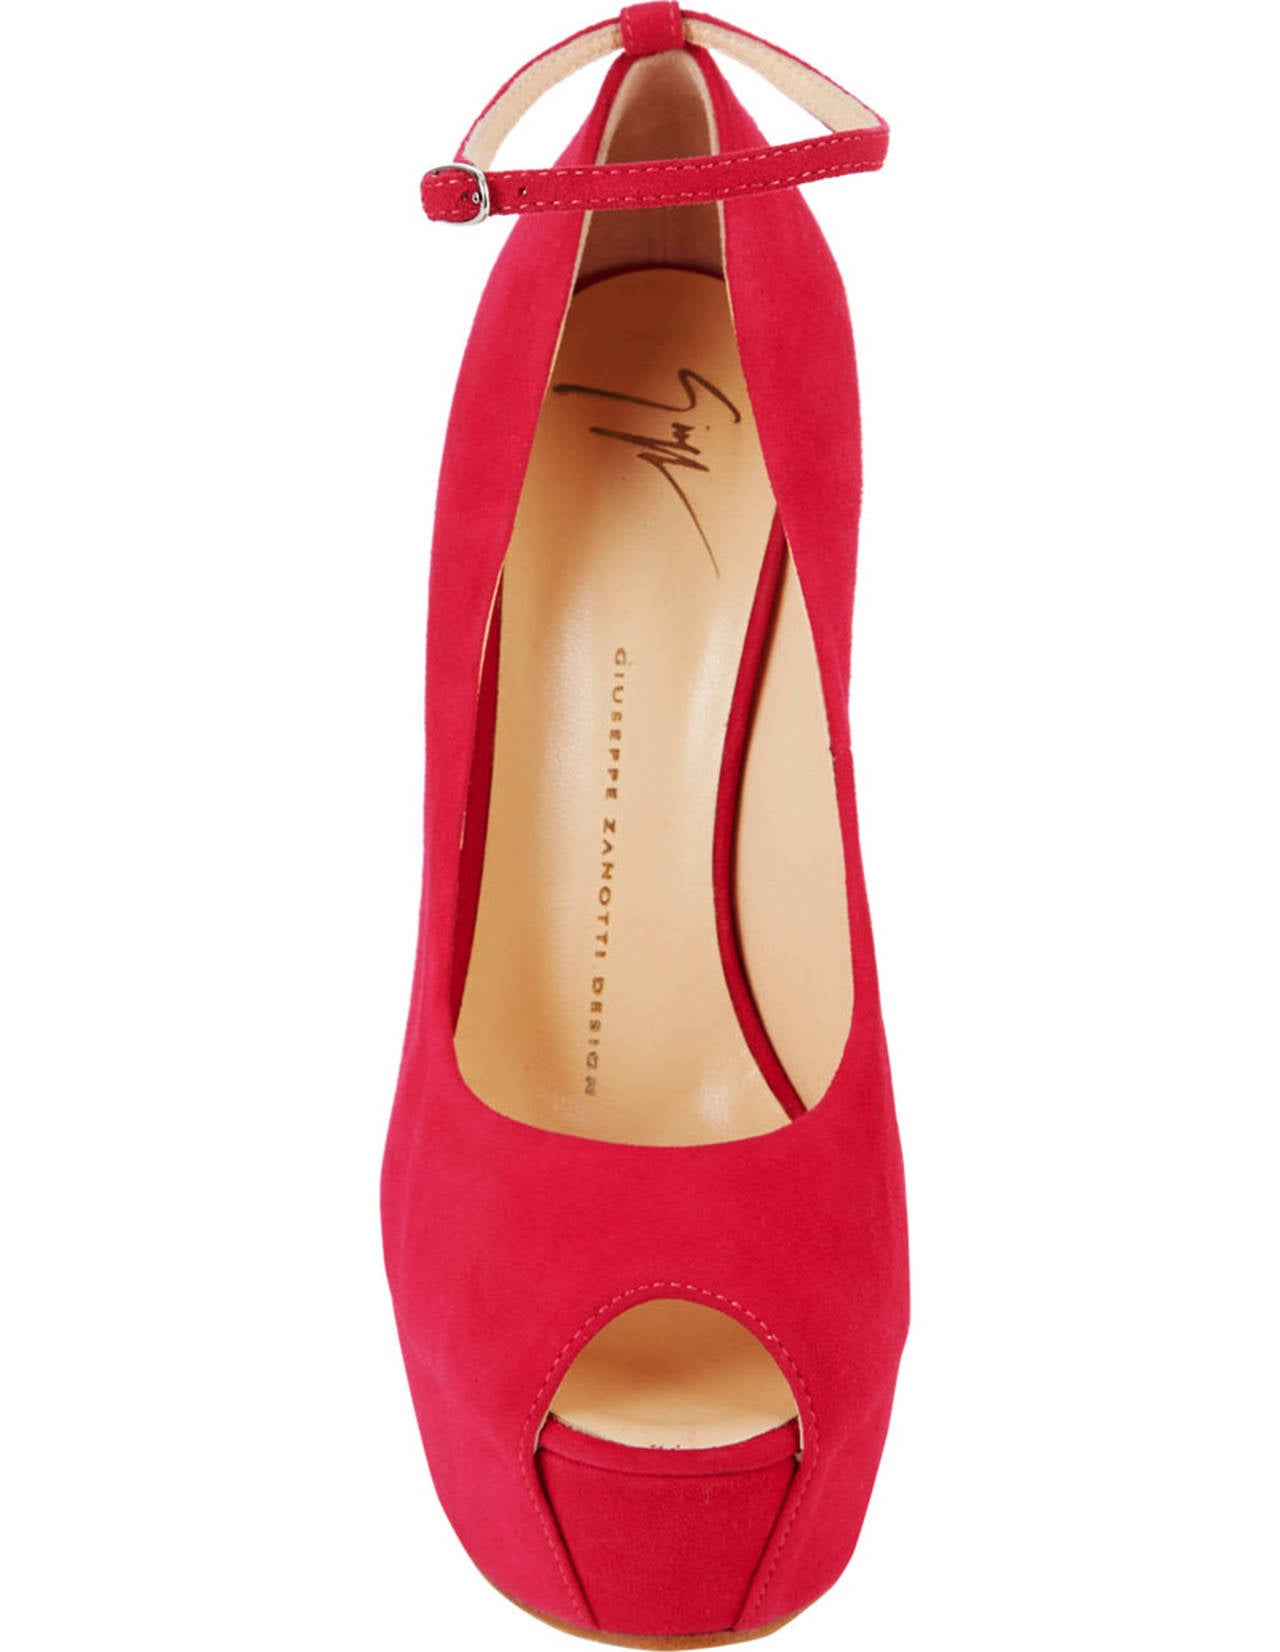 Red New GIUSEPPE ZANOTTI BOUGANVILLE SCULPTED WEDGES with OPEN TOE